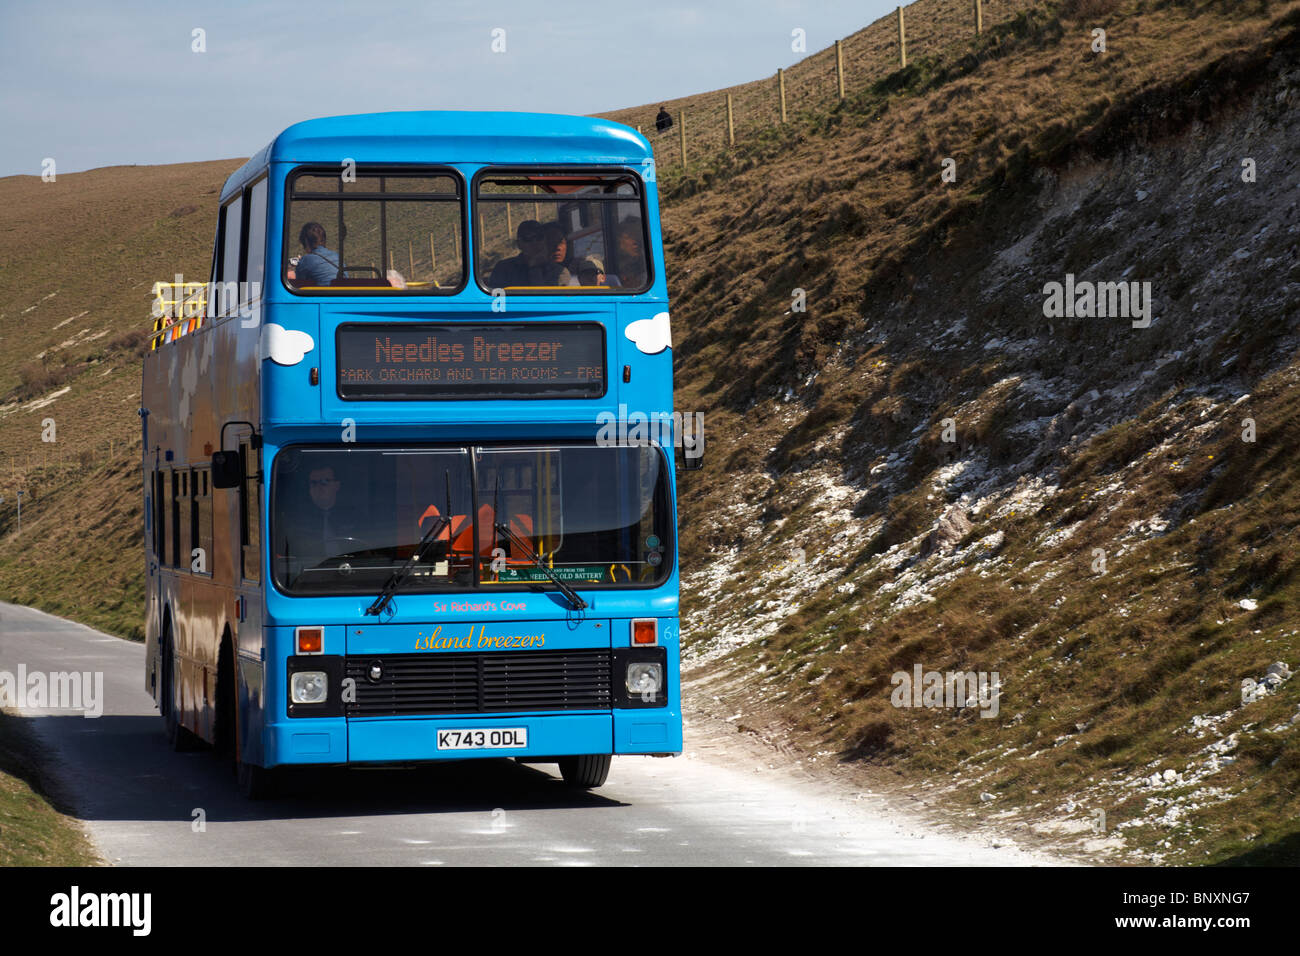 Seeing the island on an open top Needles Breezer Island Breezers bus at the Isle of Wight, Hampshire, England UK  in April Stock Photo